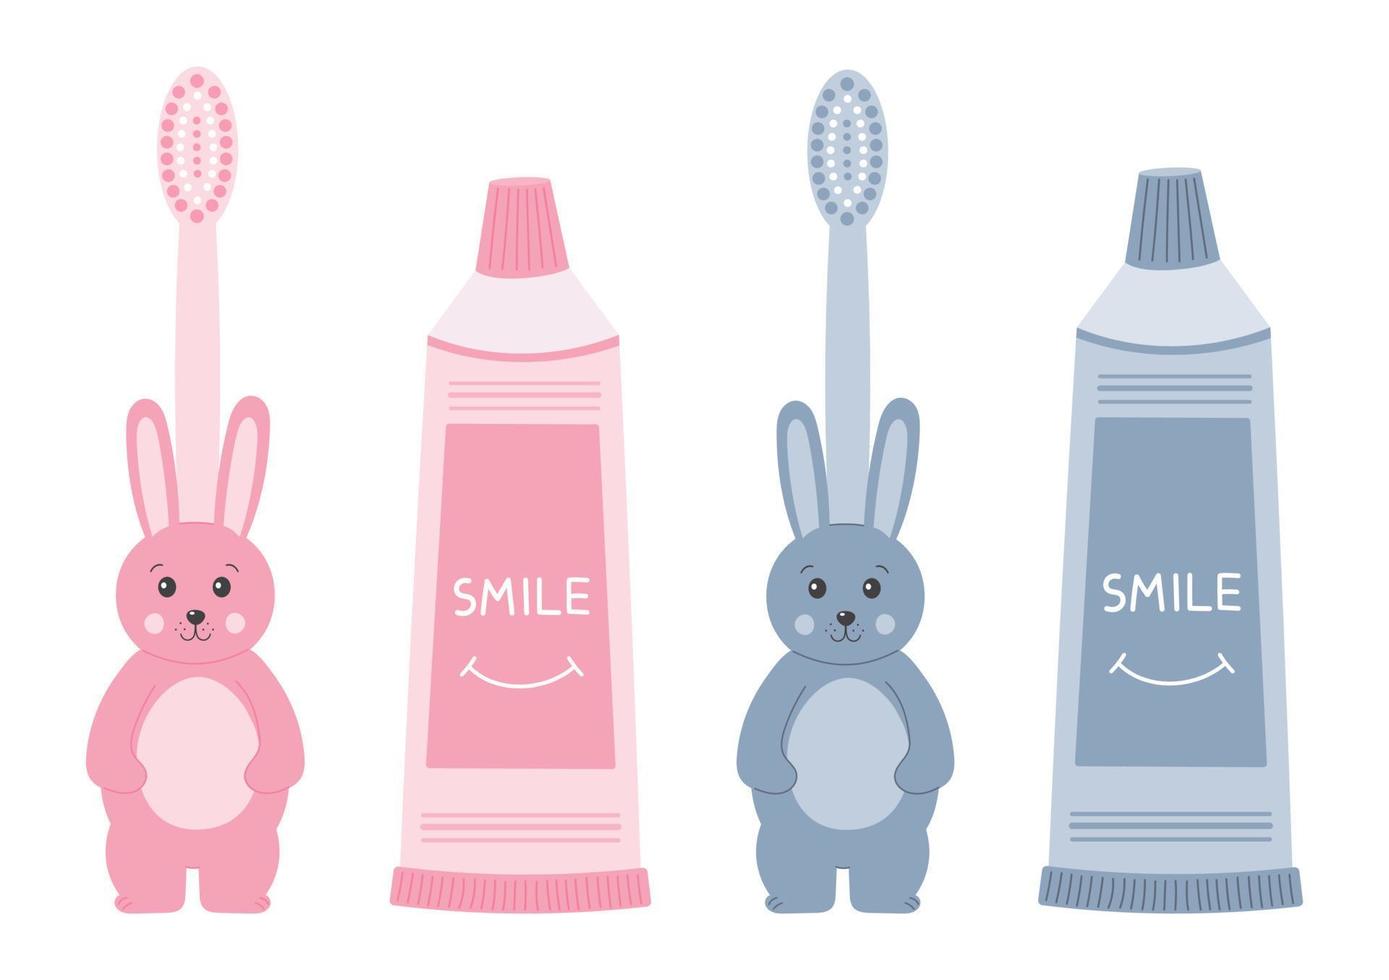 Toothpaste and toothbrush for little kids. Cute dental care accessories for childrens. Suitable for the design of pediatric dentistry. Baby bunny brash and paste. vector